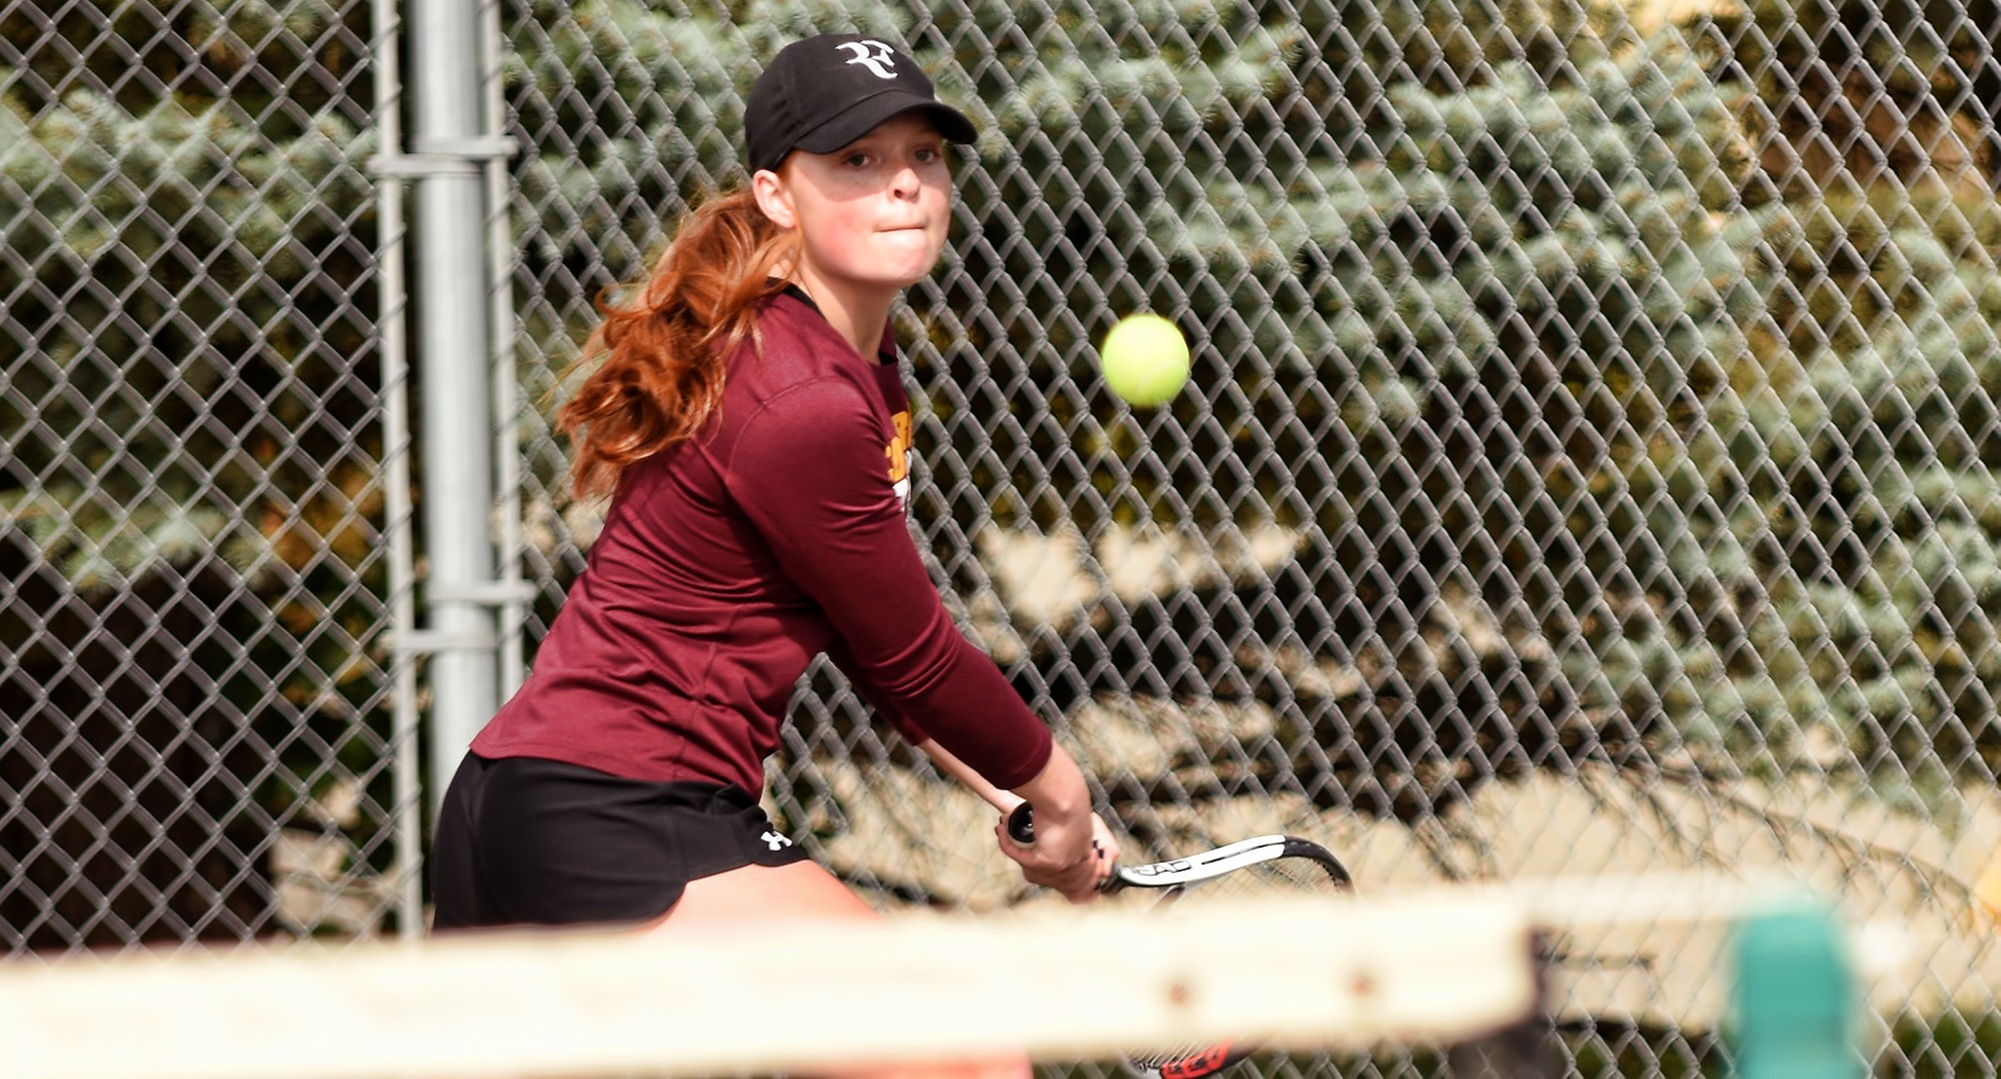 Sophomore Brianna Bell earned one of the five singles wins for the Cobbers against St. Scholastica. Bell now has two wins in her first three matches of the year.